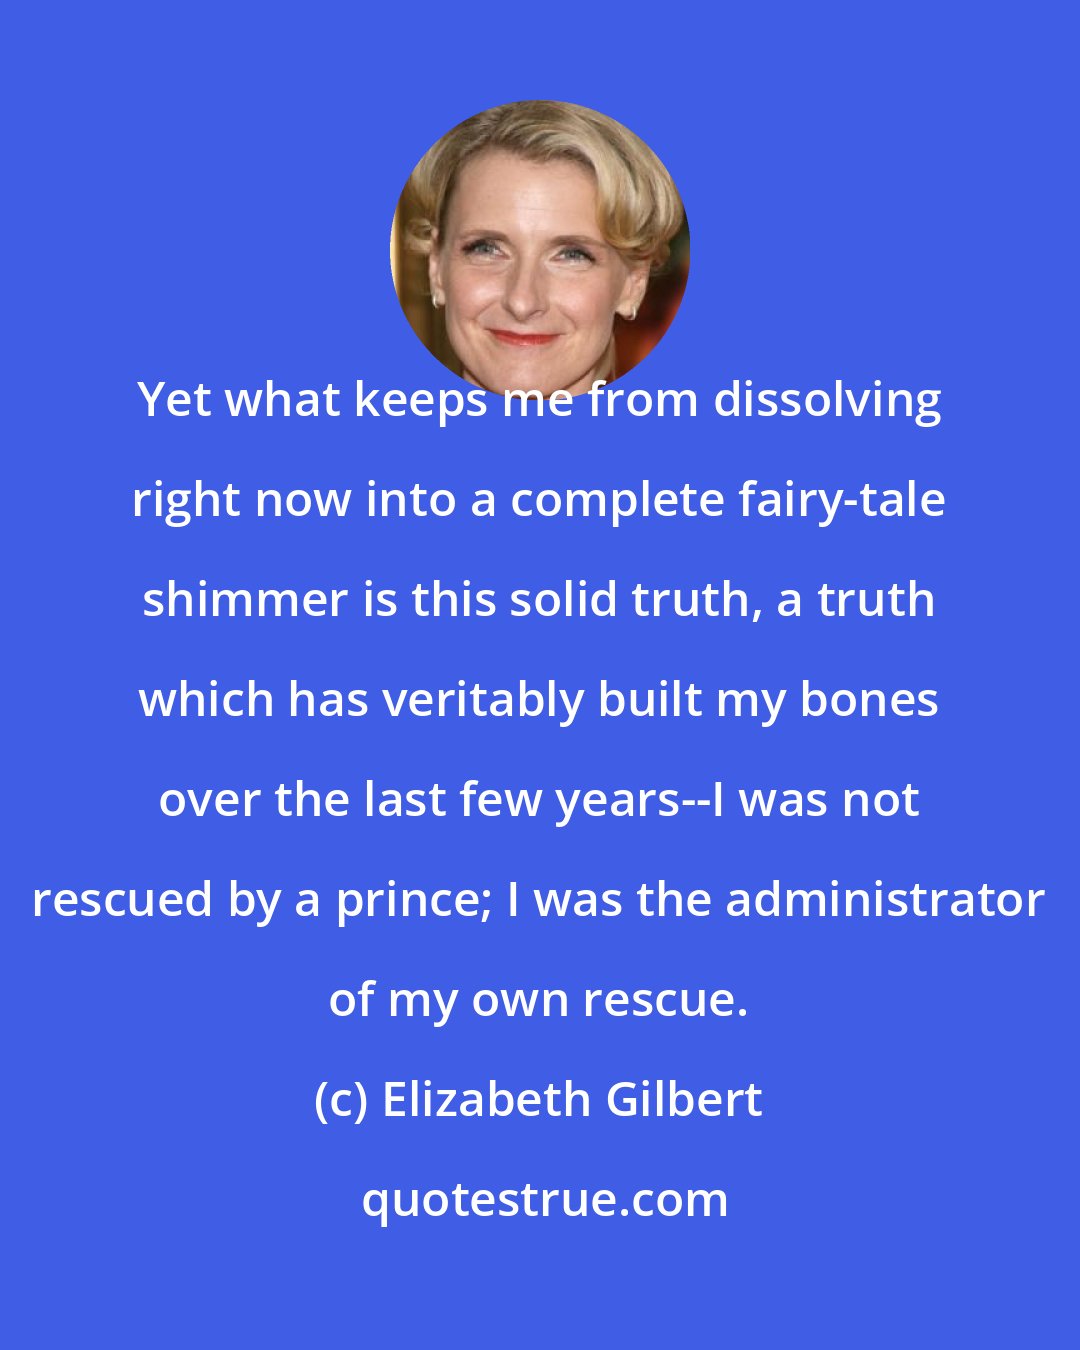 Elizabeth Gilbert: Yet what keeps me from dissolving right now into a complete fairy-tale shimmer is this solid truth, a truth which has veritably built my bones over the last few years--I was not rescued by a prince; I was the administrator of my own rescue.